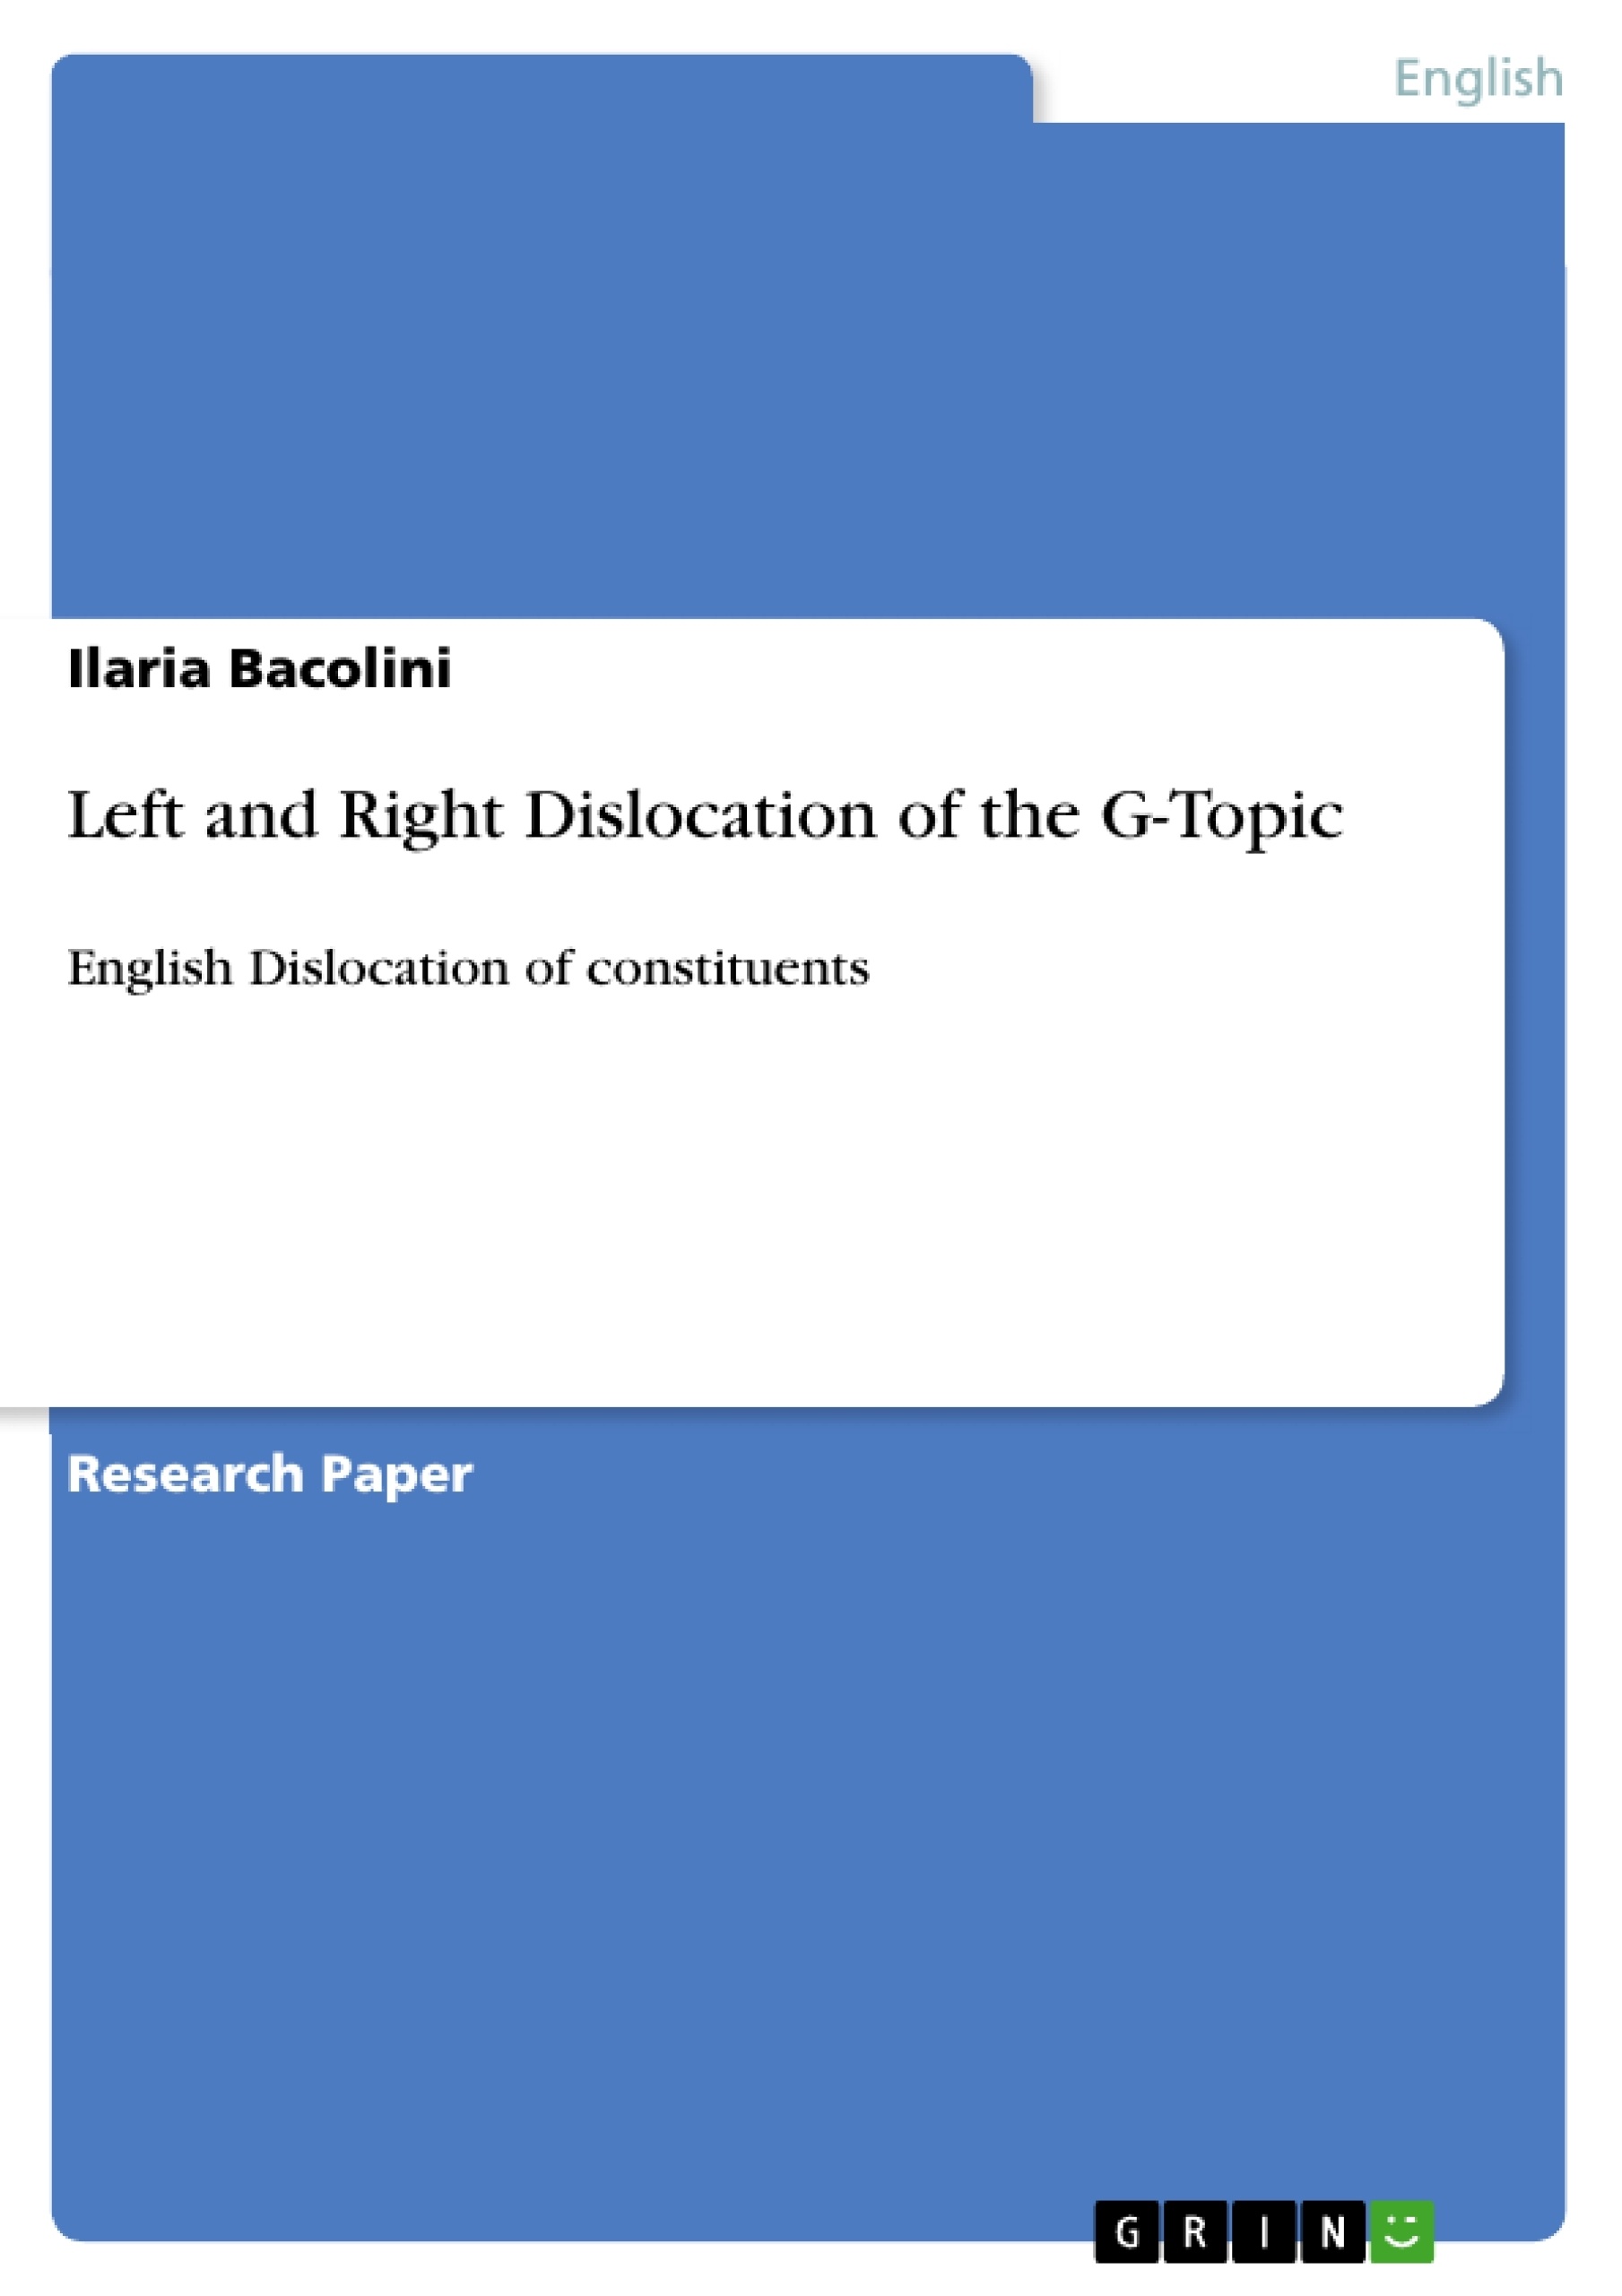 Titre: Left and Right Dislocation of the G-Topic